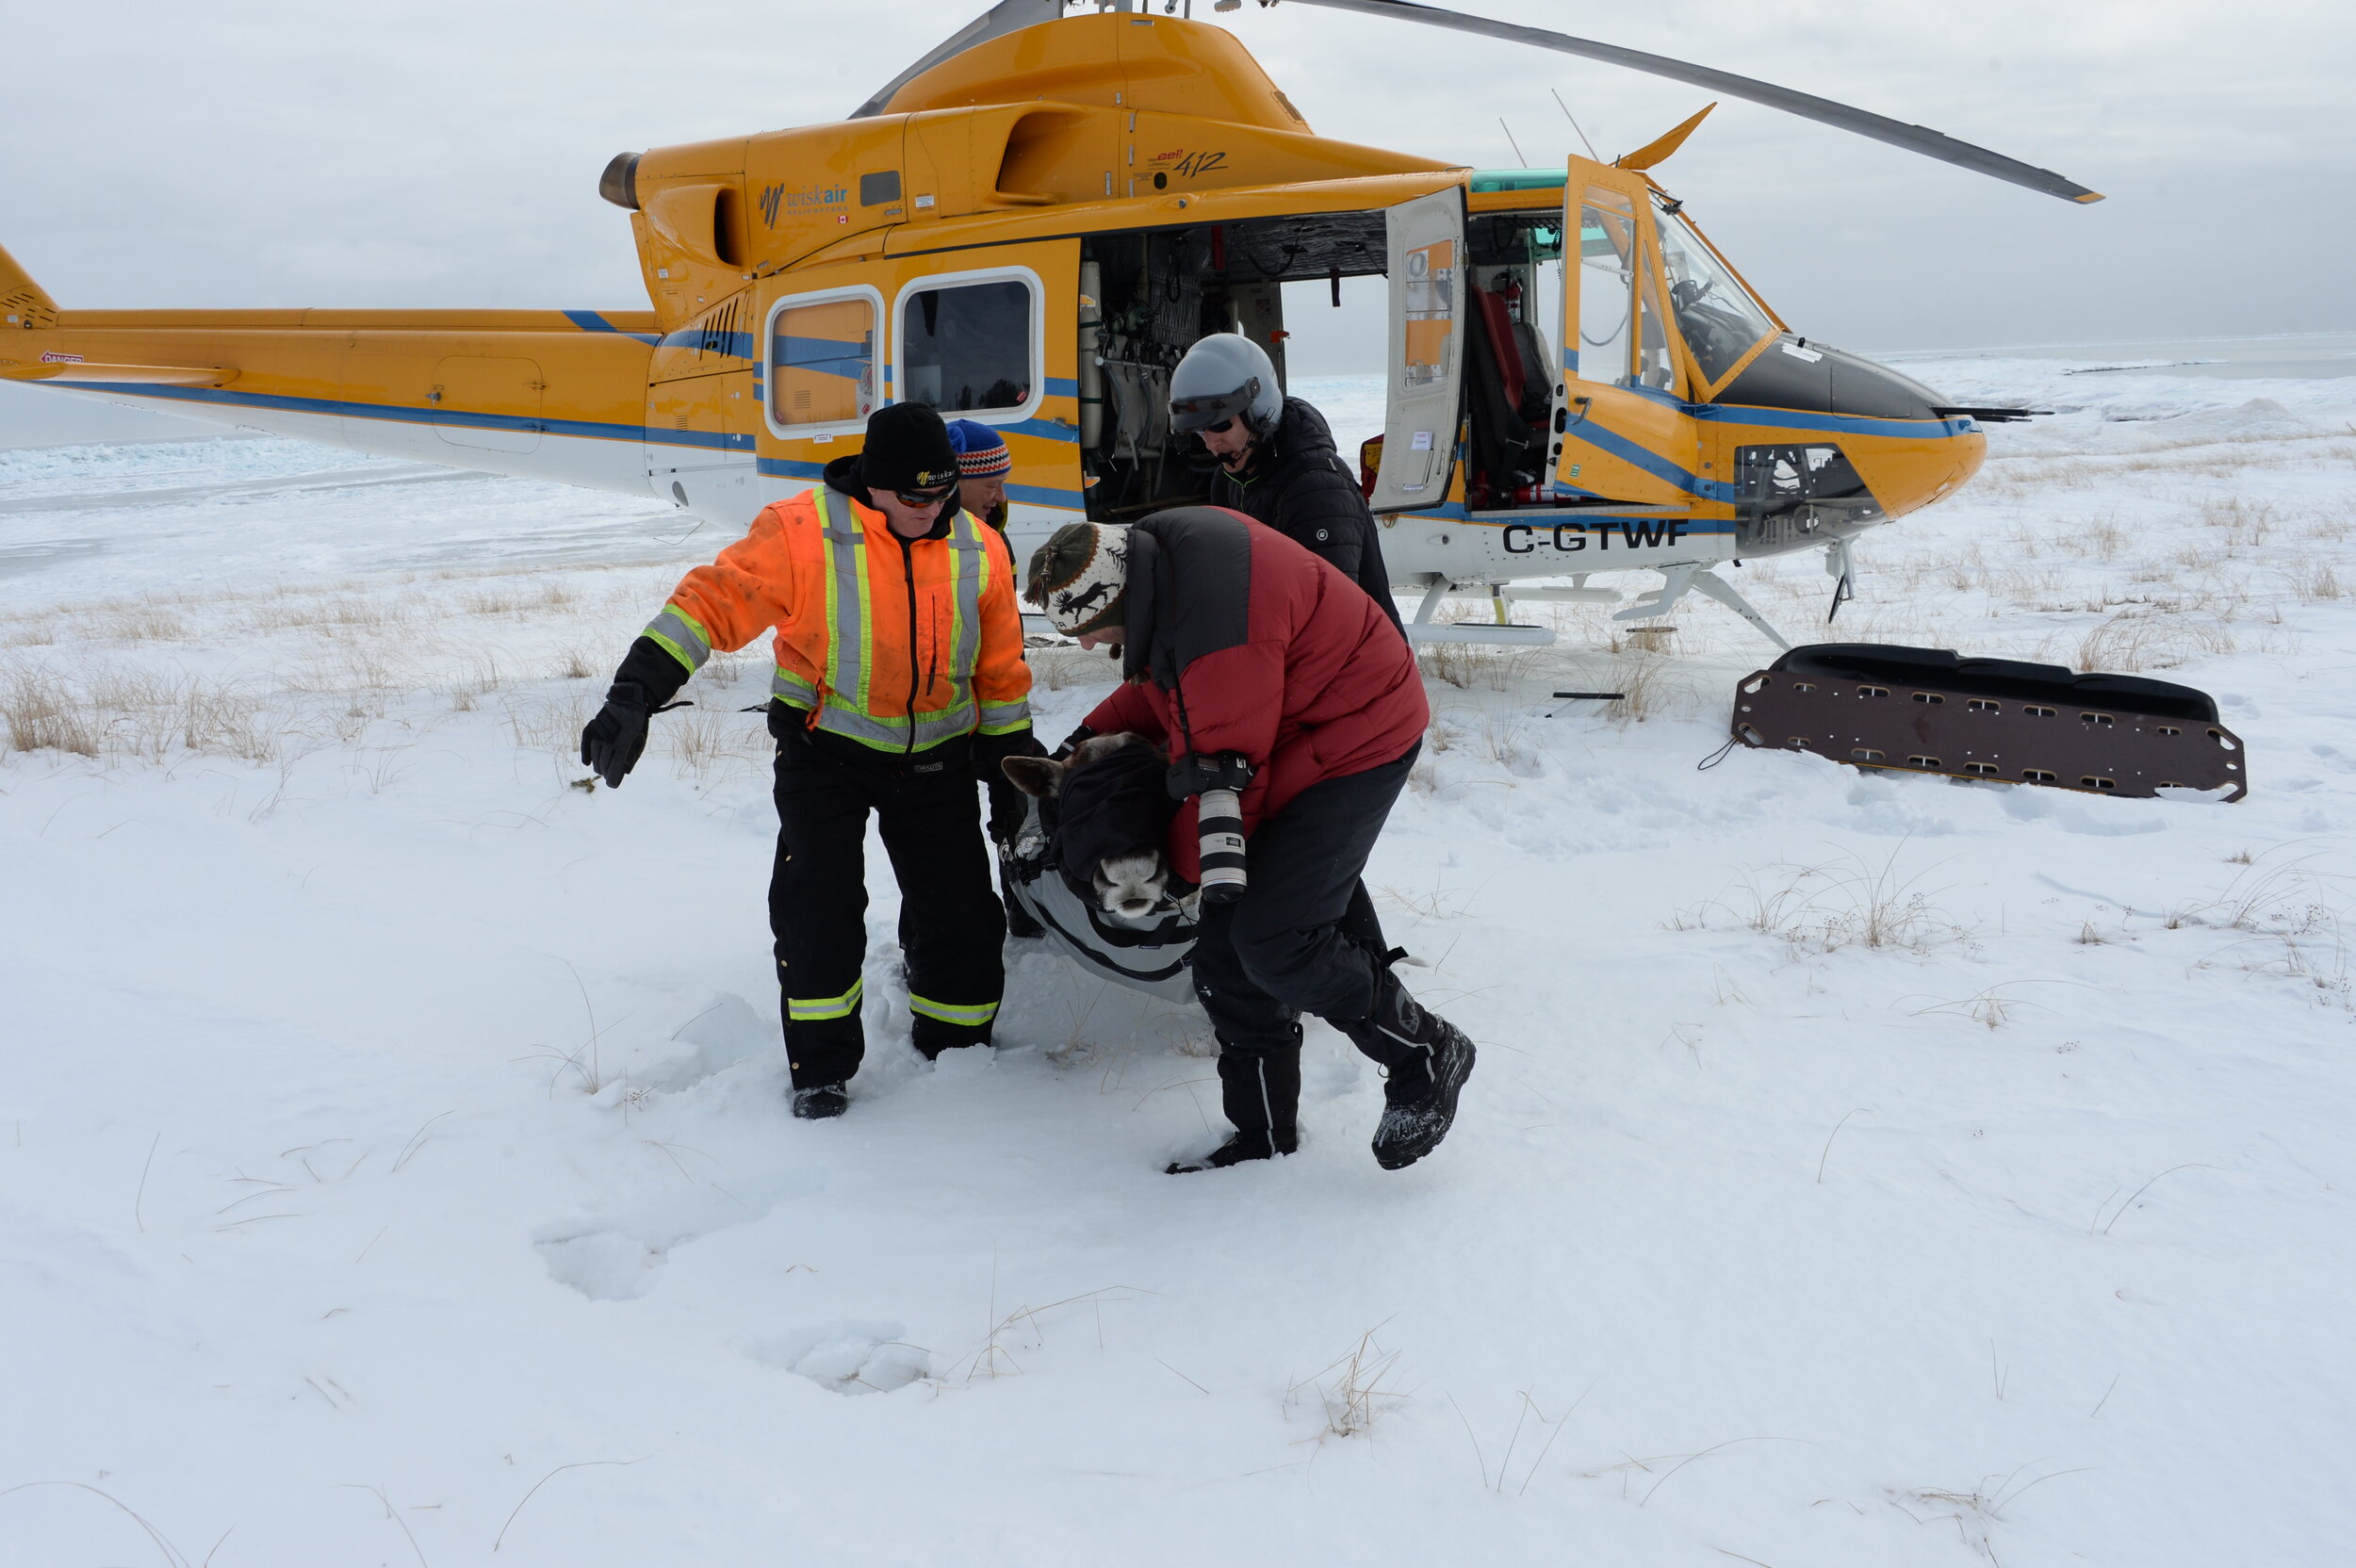 Lake Superior Caribou: Three men in winter clothes carry a bound caribou out of a helicopter onto snow